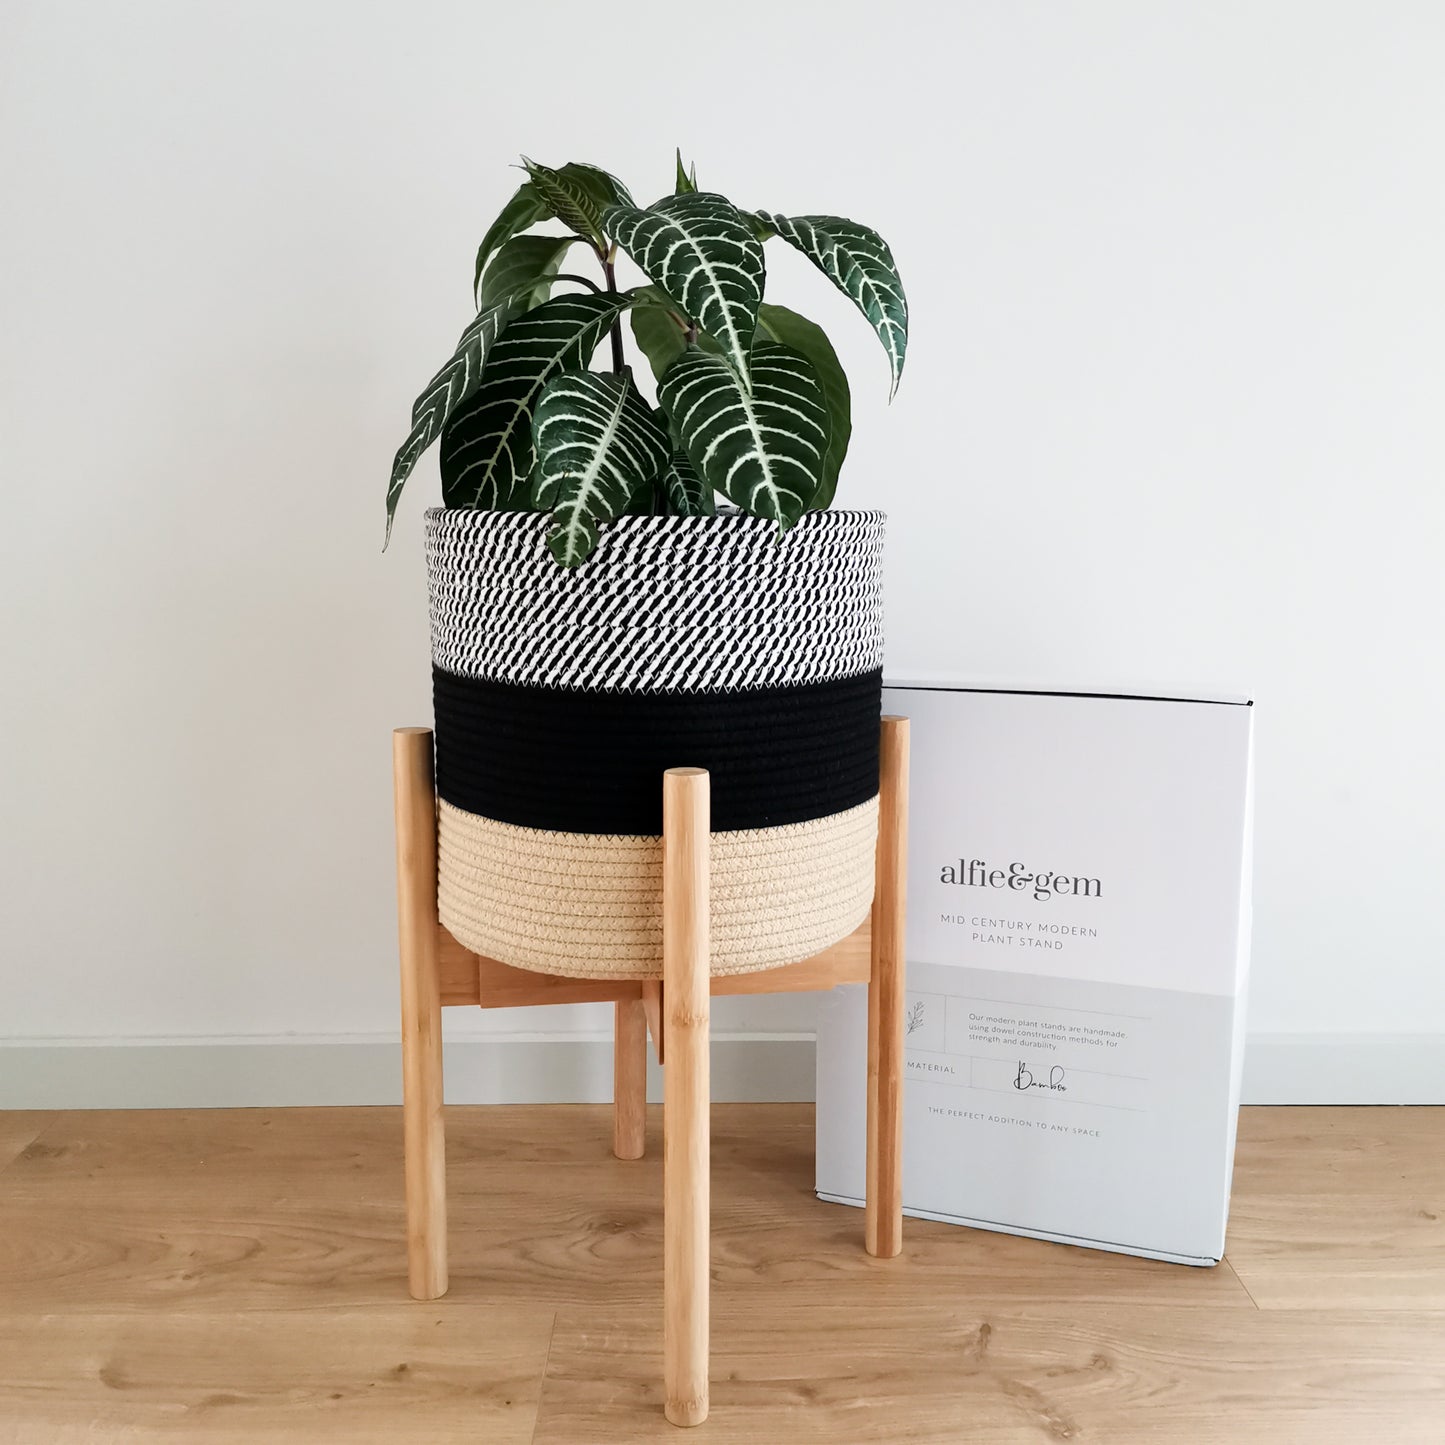 Mid-century plant stand and plant holder made from eco-friendly materials.